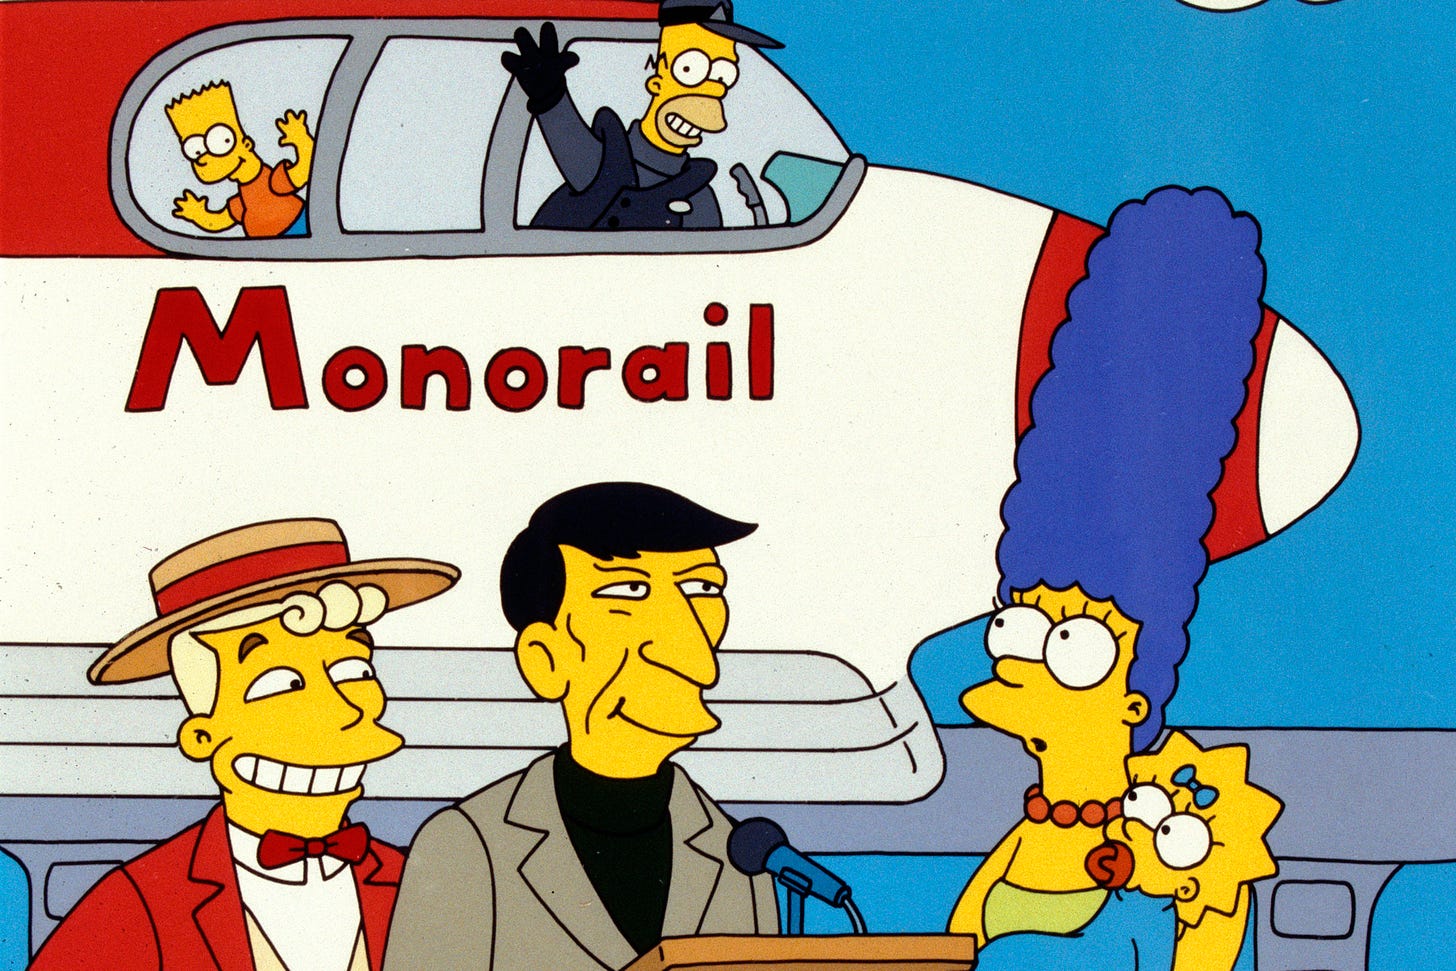 The Simpsons" Marge vs. the Monorail (TV Episode 1993) - IMDb